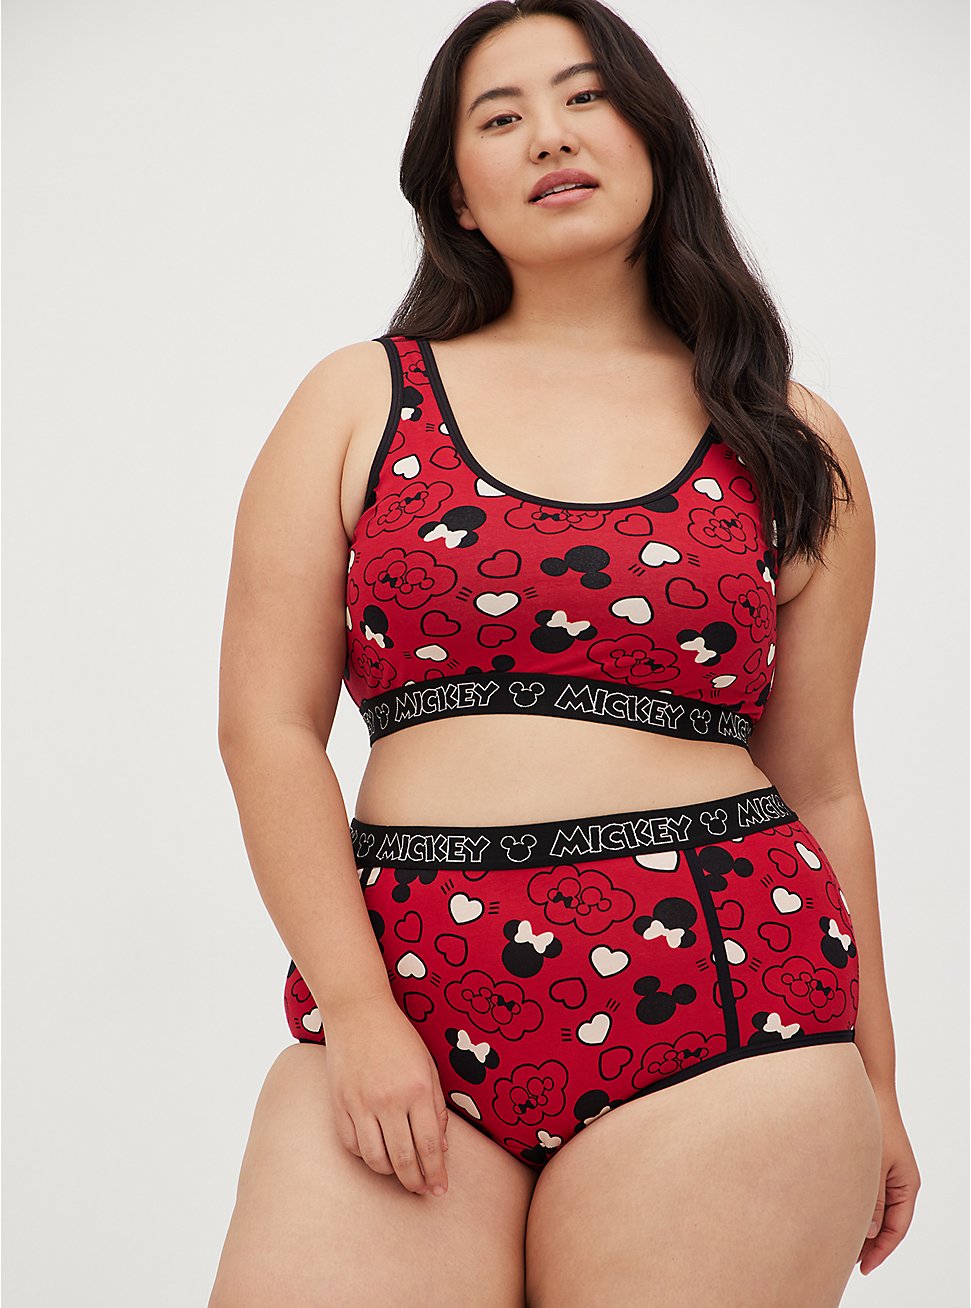 Plus Size Brief Panty - Cotton Disney Mickey Mouse I Heart Red, MULTI, hi-res